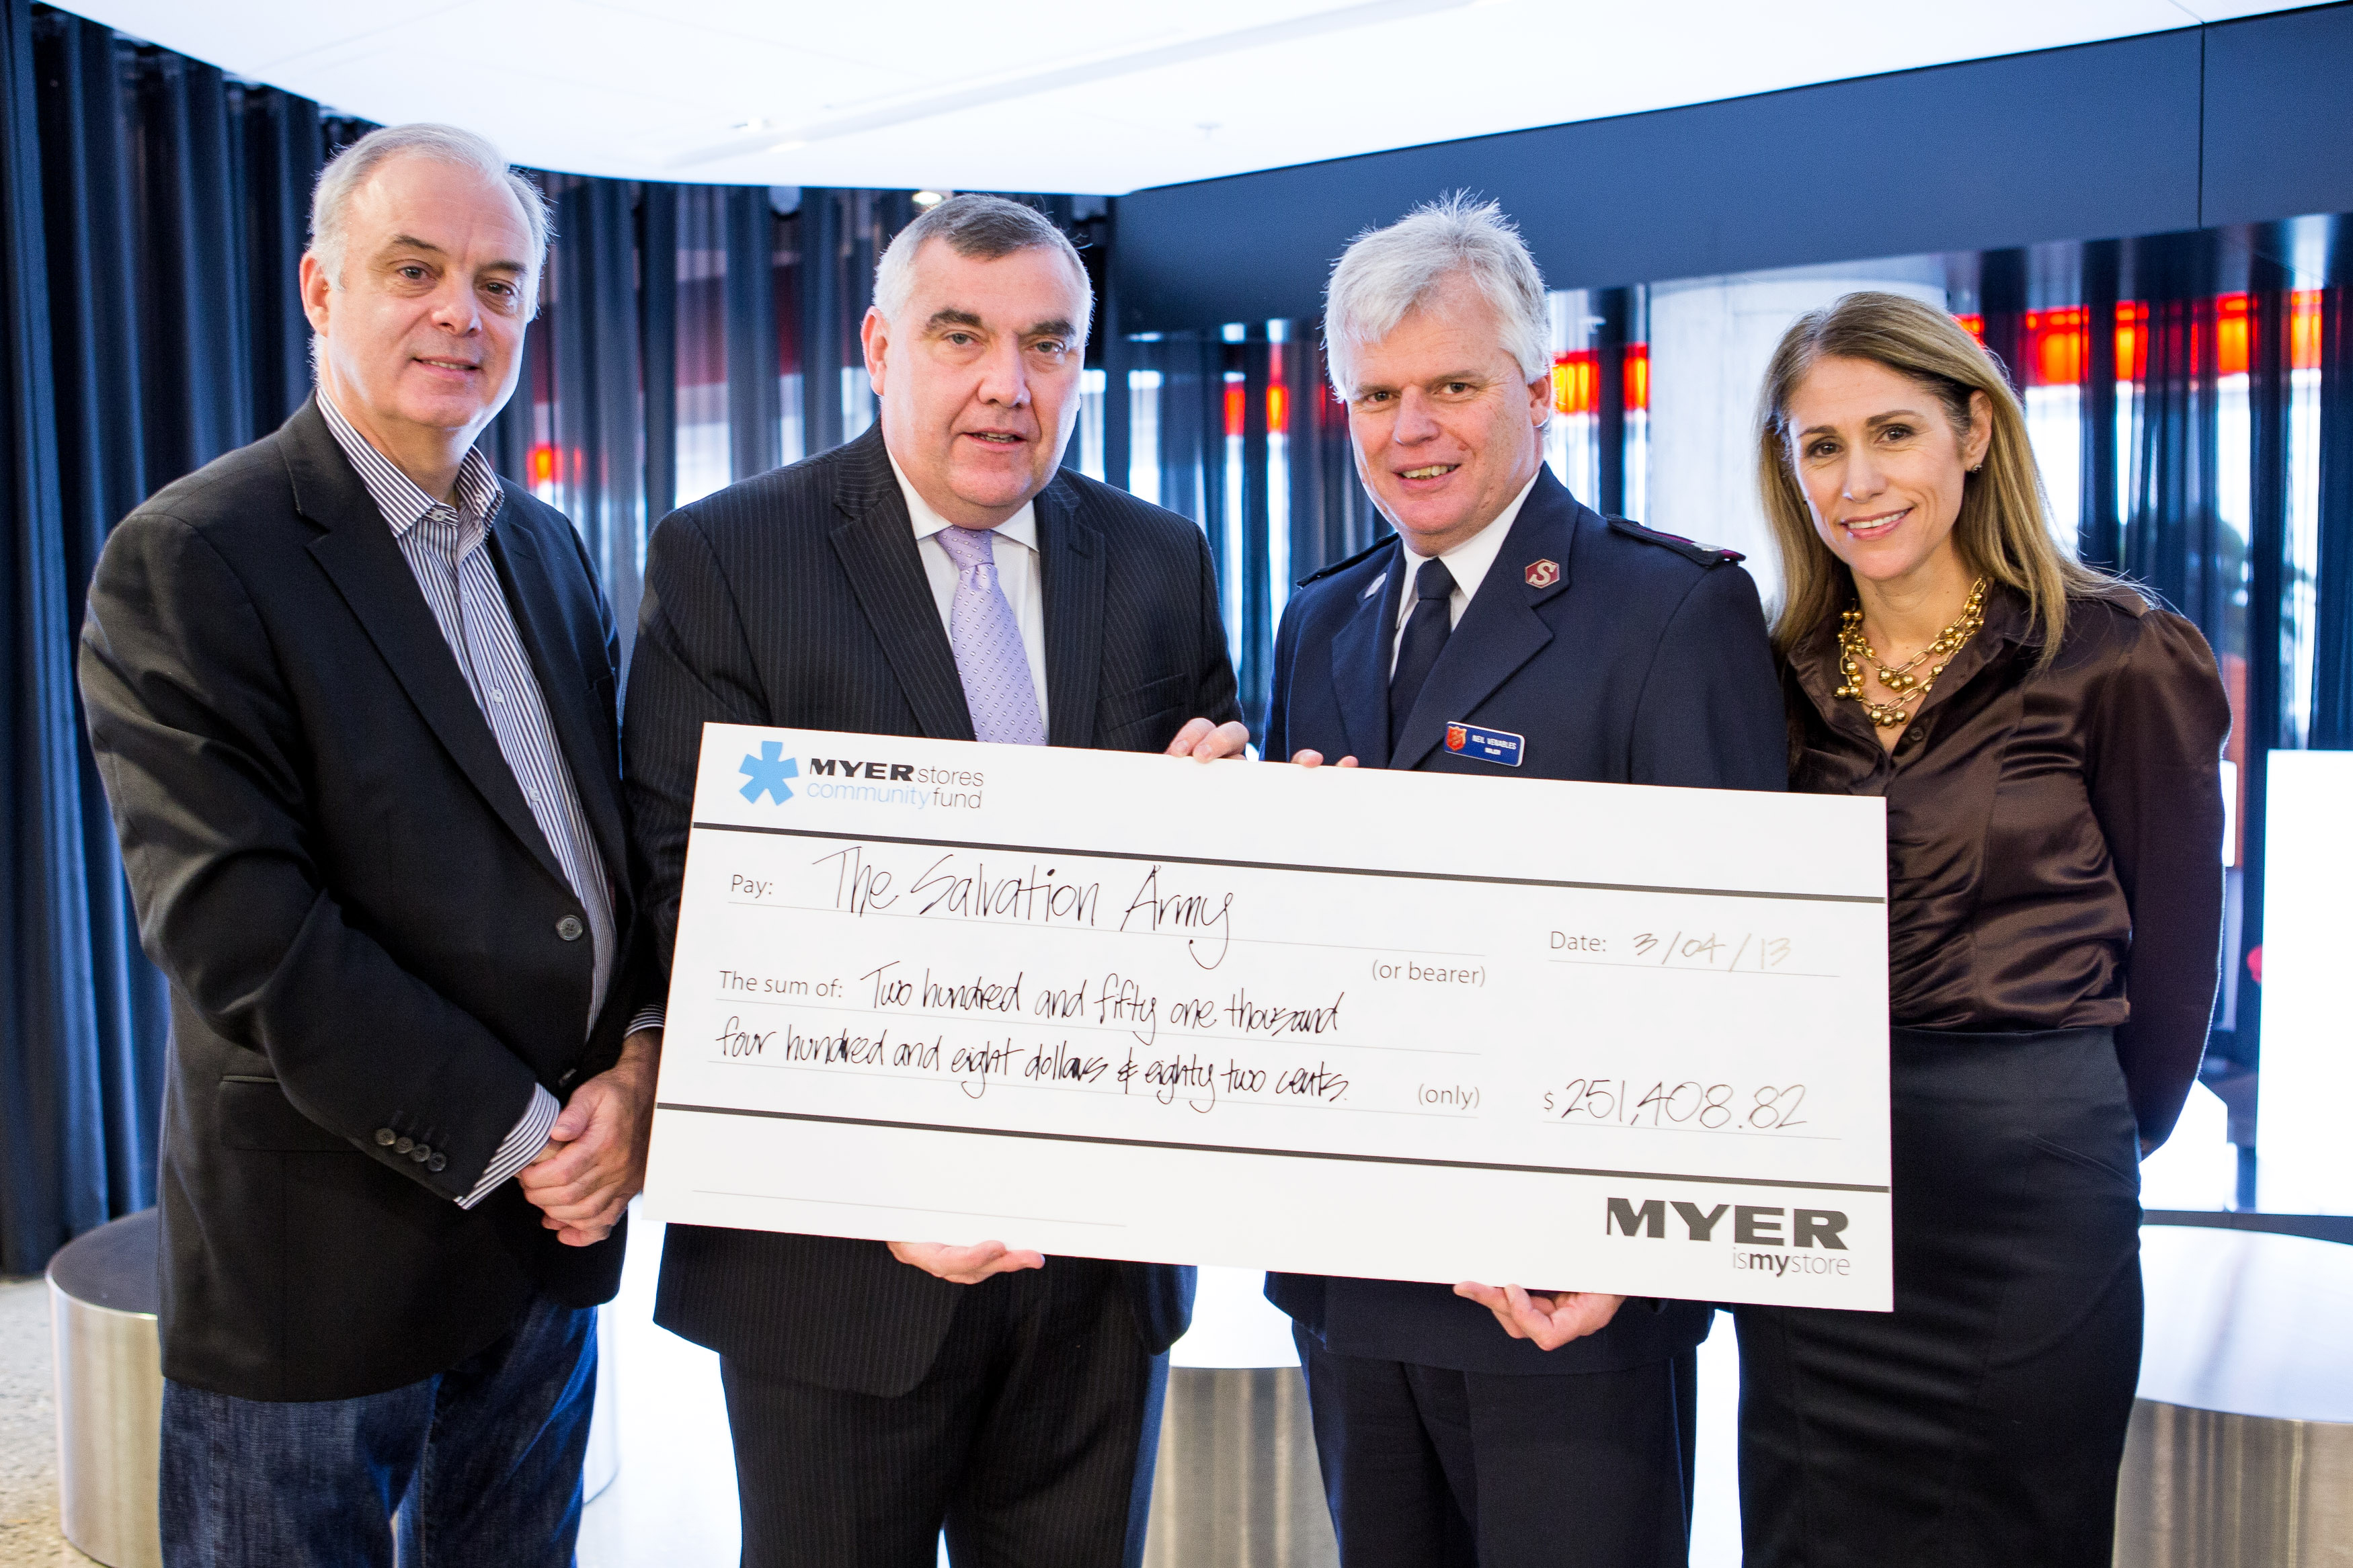 Picture from left to right: Mr John Hawker, Board Member of the Myer Community Fund; Mr Bernie Brookes, CEO of Myer, Major Neil Venables, Territorial Communications & Fundraising Secretary for TSA; Ms Megan Foster, General Manager for Marketing